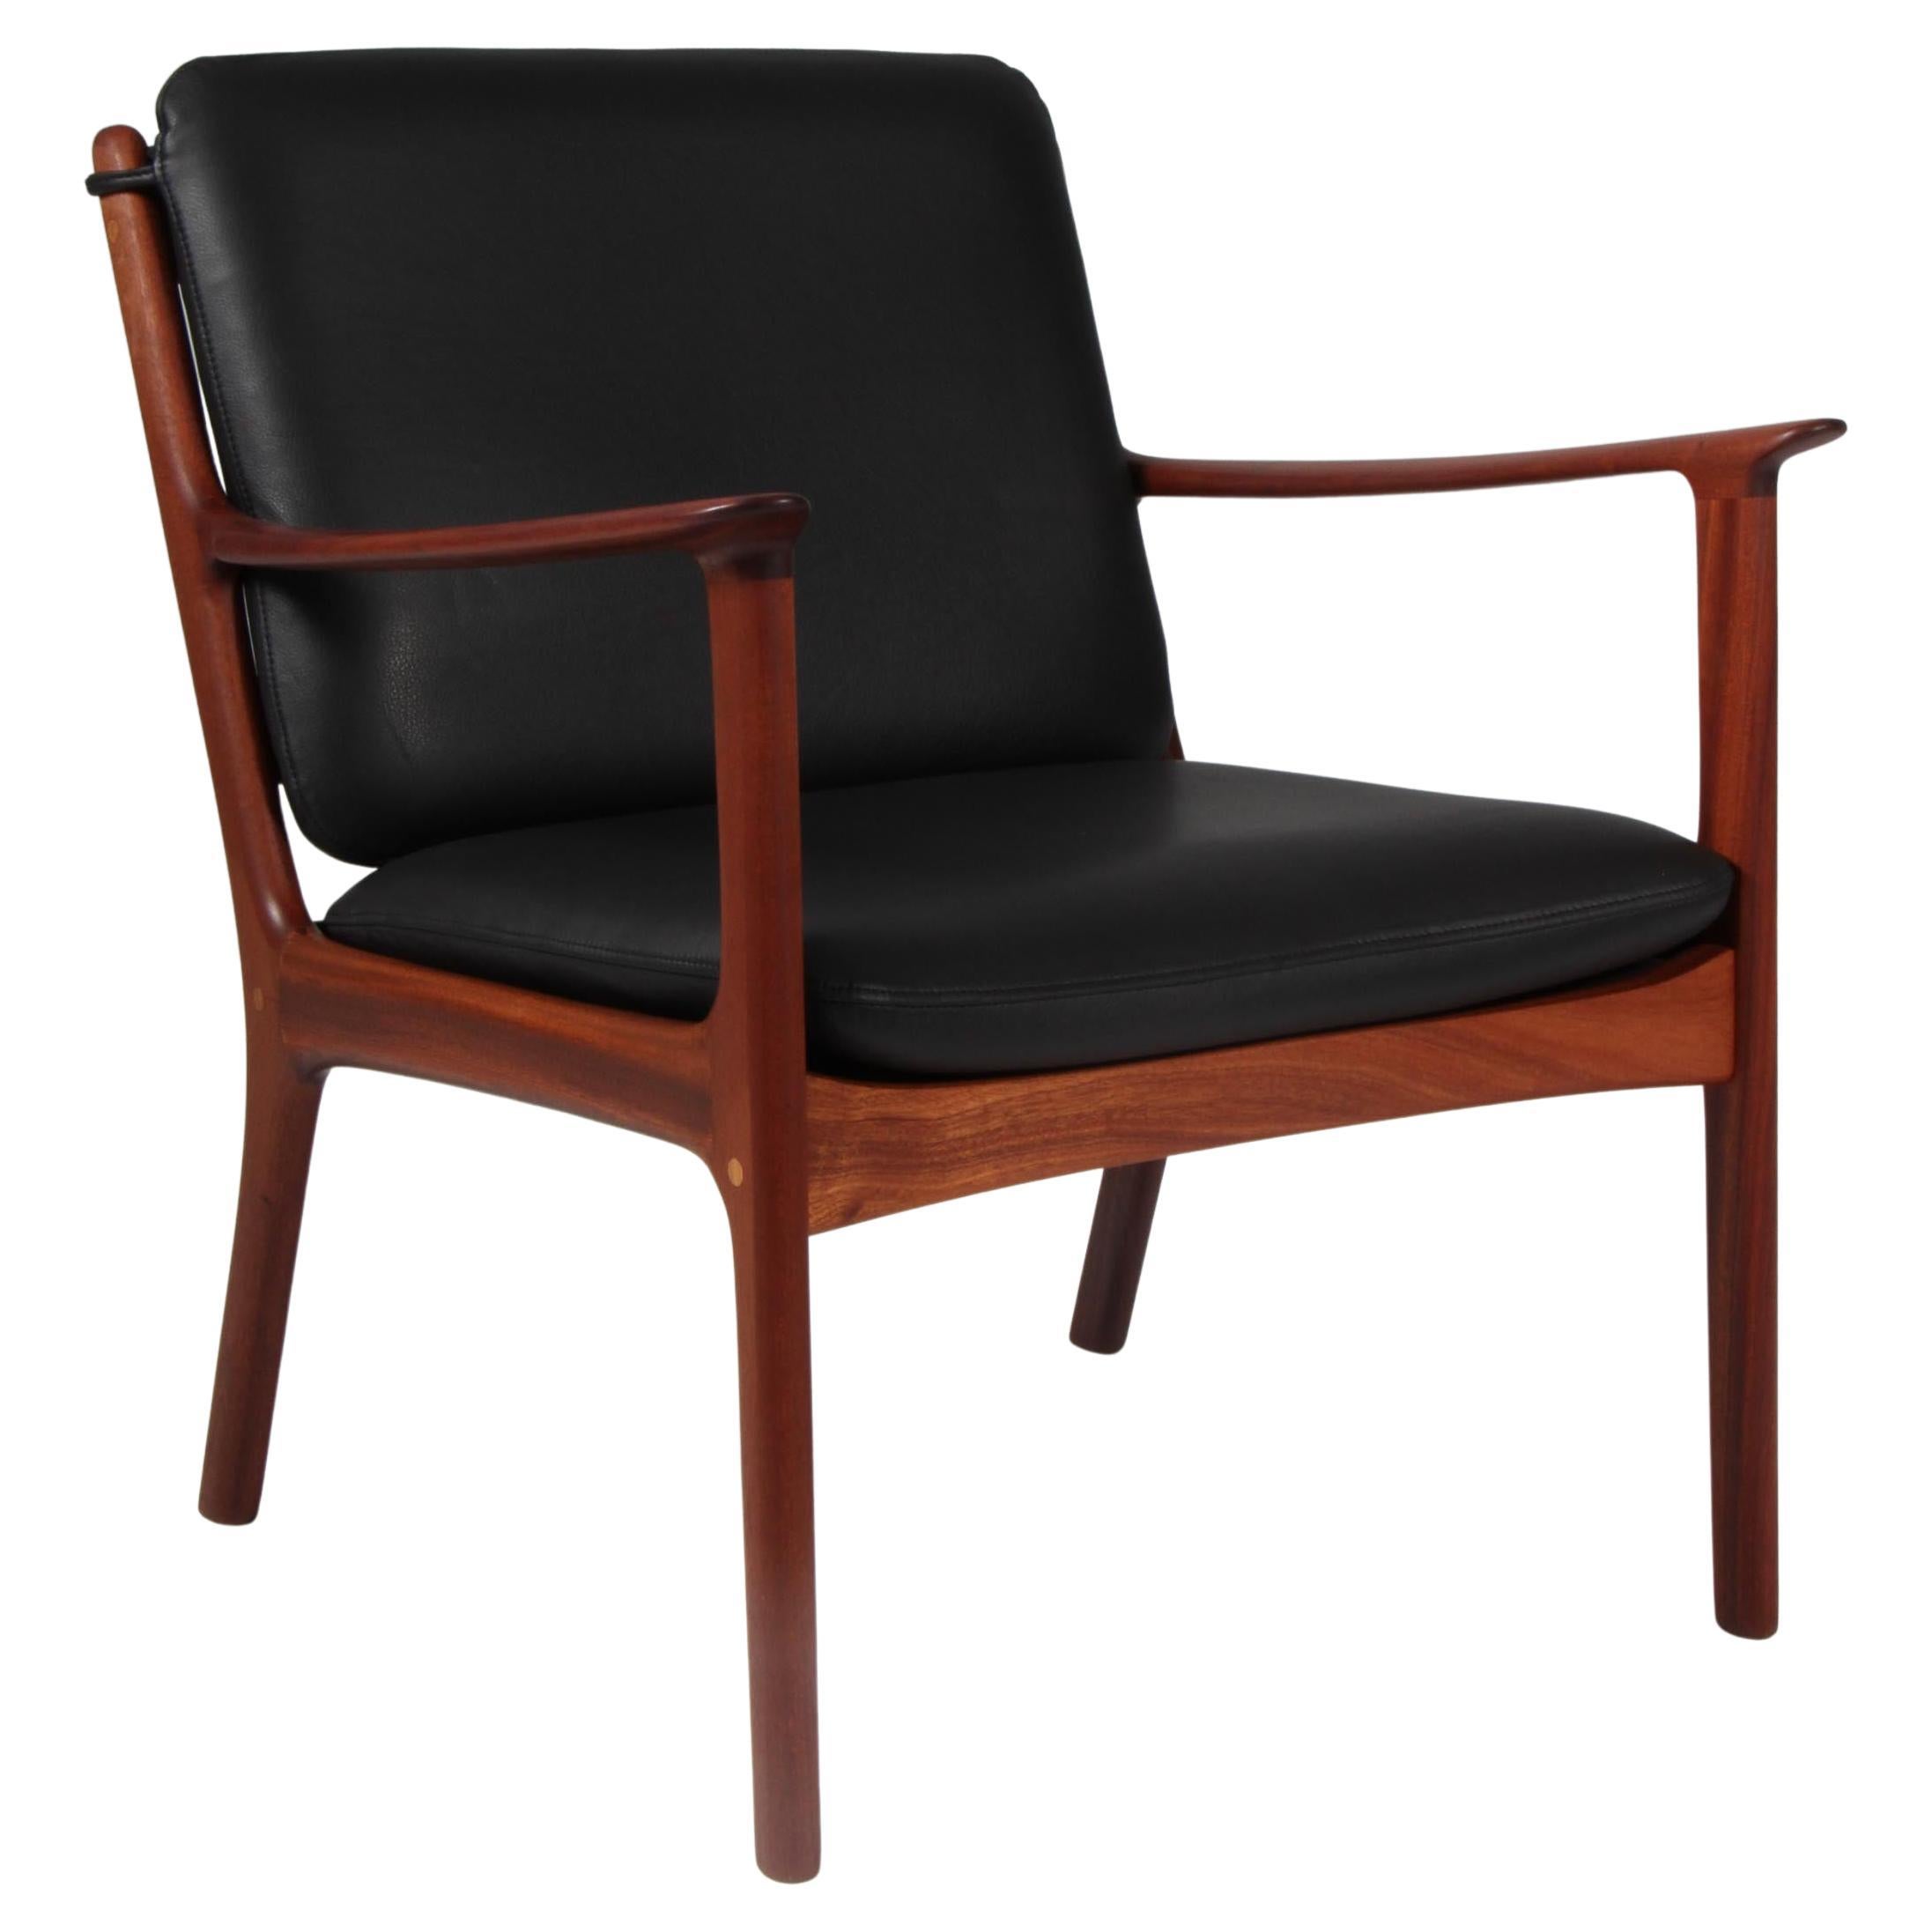 Ole Wanscher Lounge Chairs, Model PJ112, Black Aniline Leather